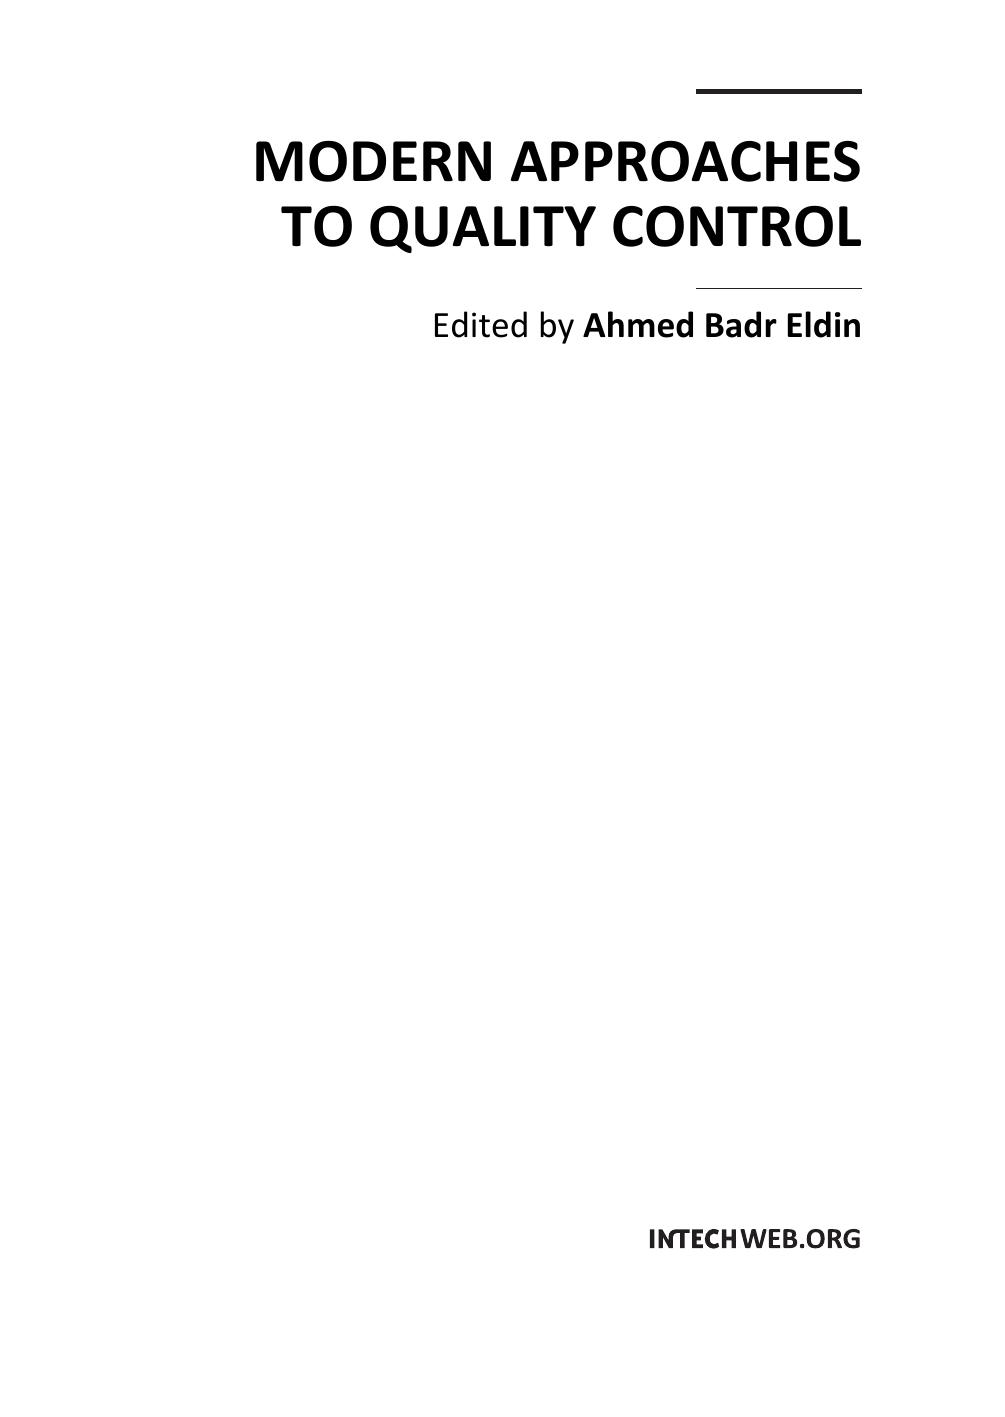 Modern Approaches To Quality Control 2011.pdf